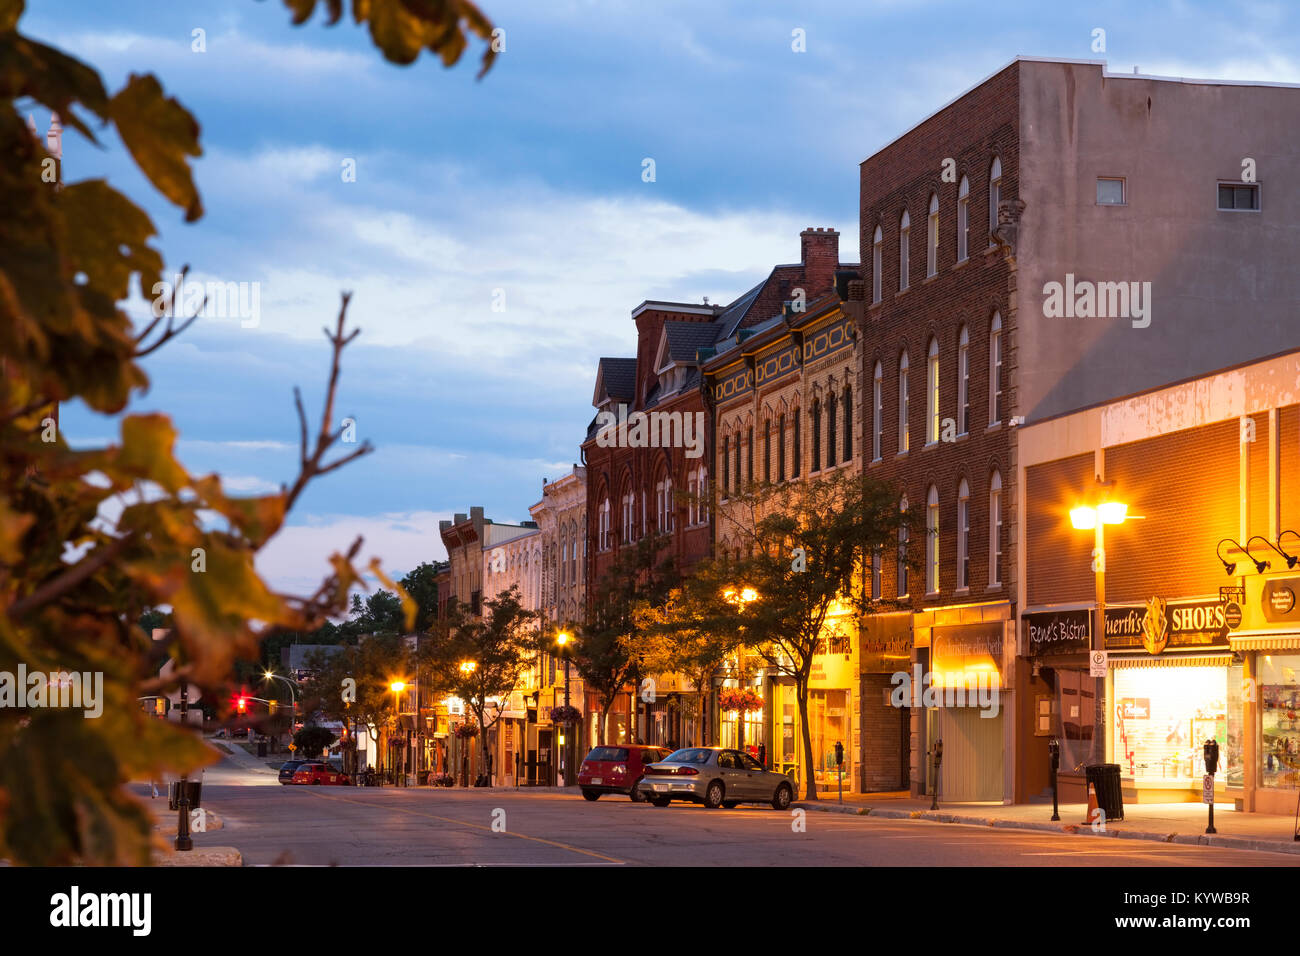 Downtown Stratford at dusk located in Stratford, Ontario, Canada. Stock Photo